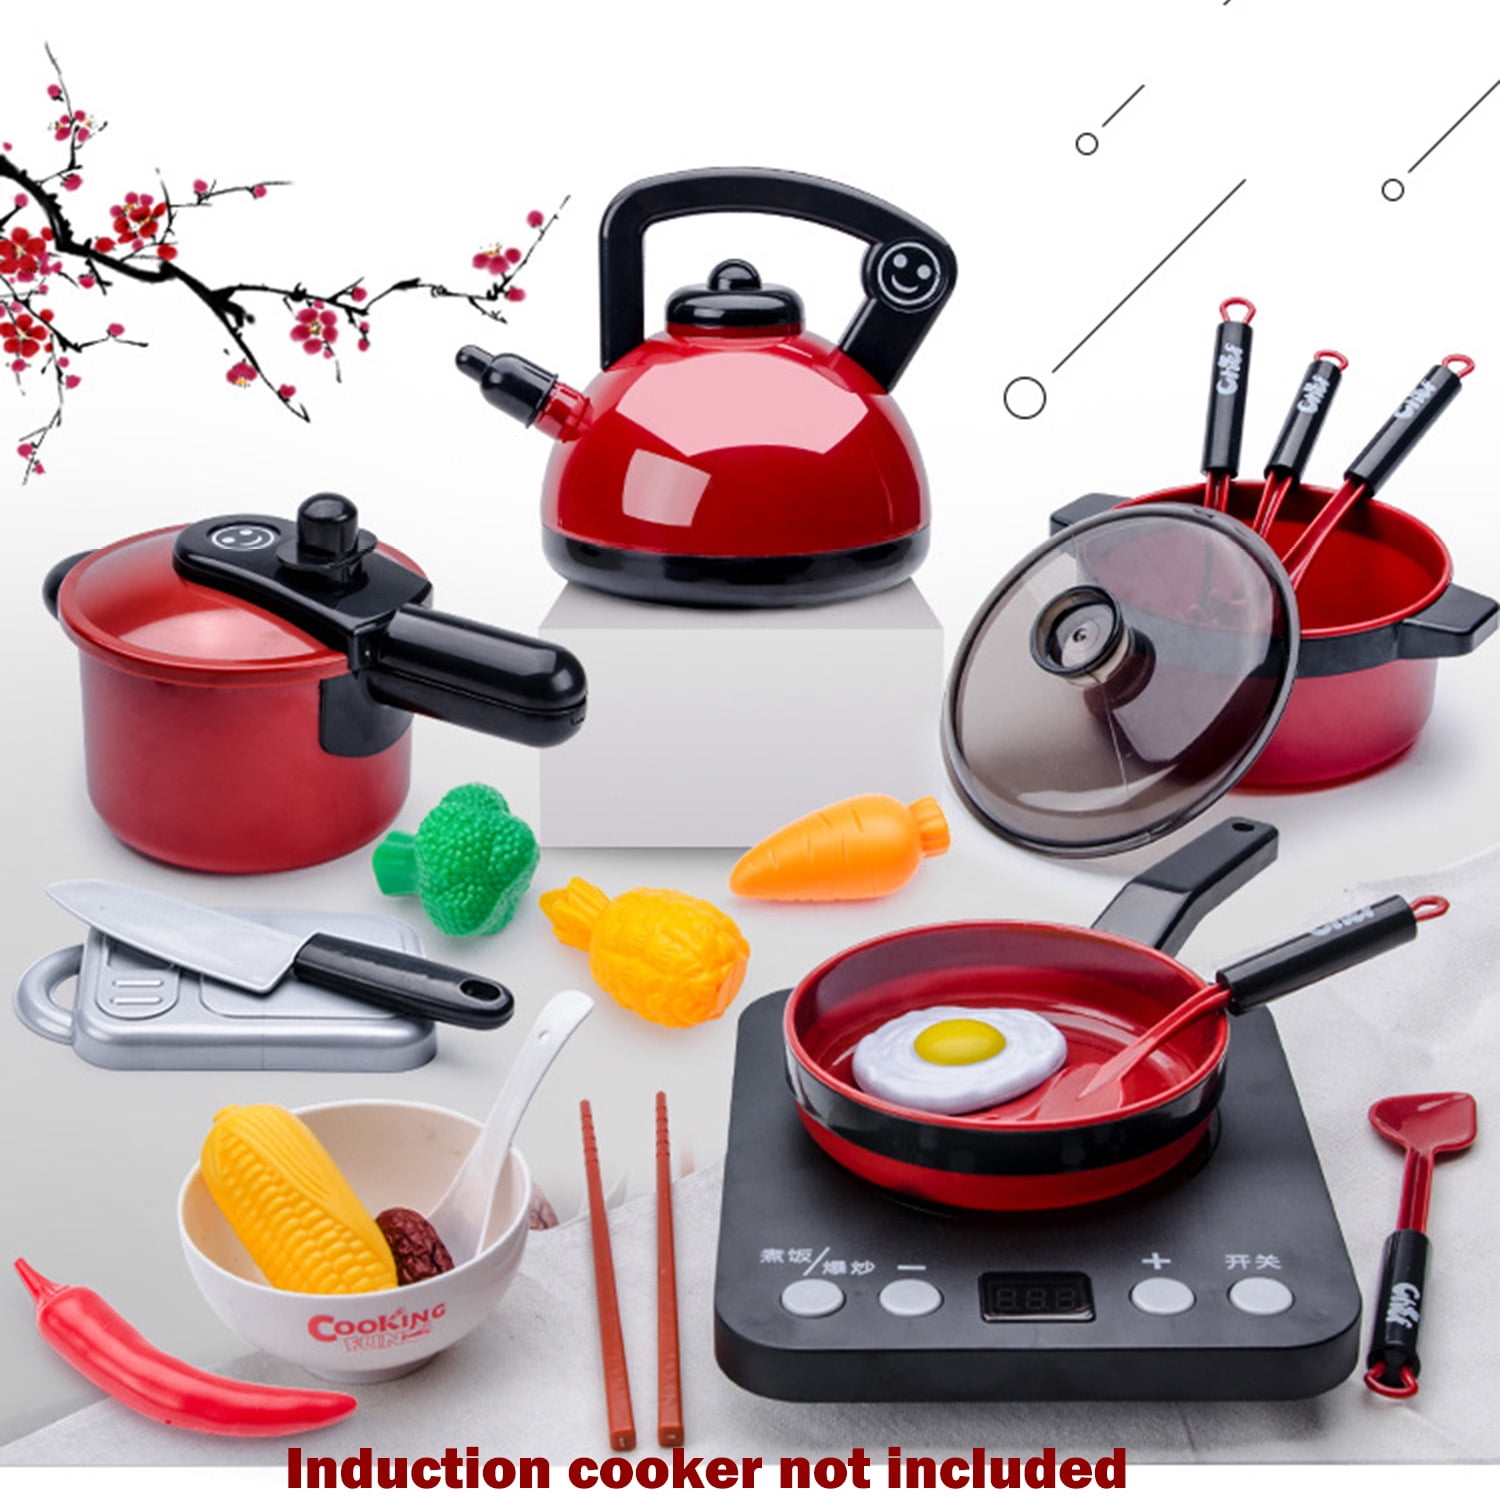 Pretend Cooking Pans and Utensils Set - 6 Pieces